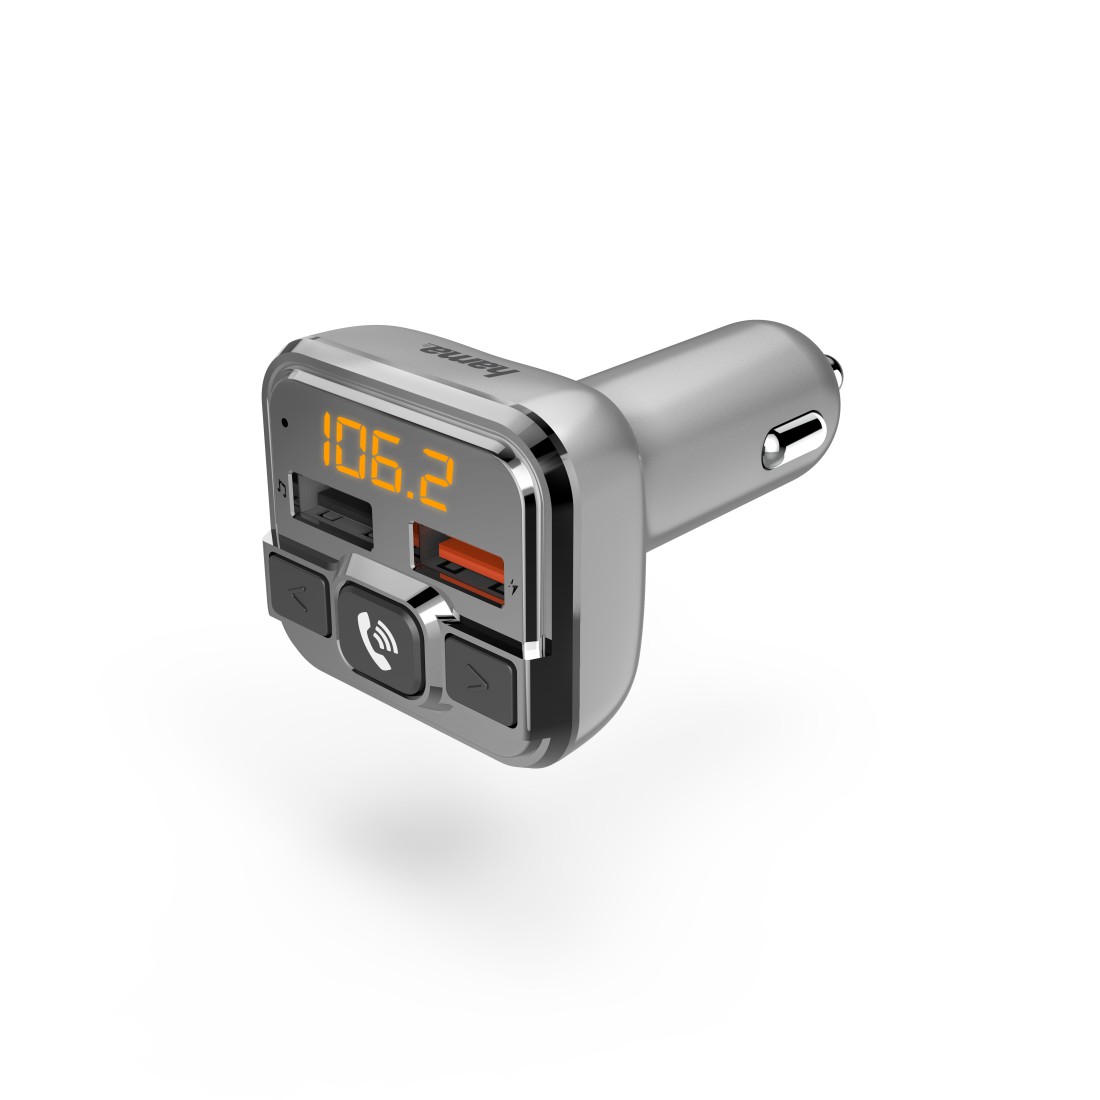 00014165 Hama FM Transmitter with Bluetooth® and Hands-Free Function